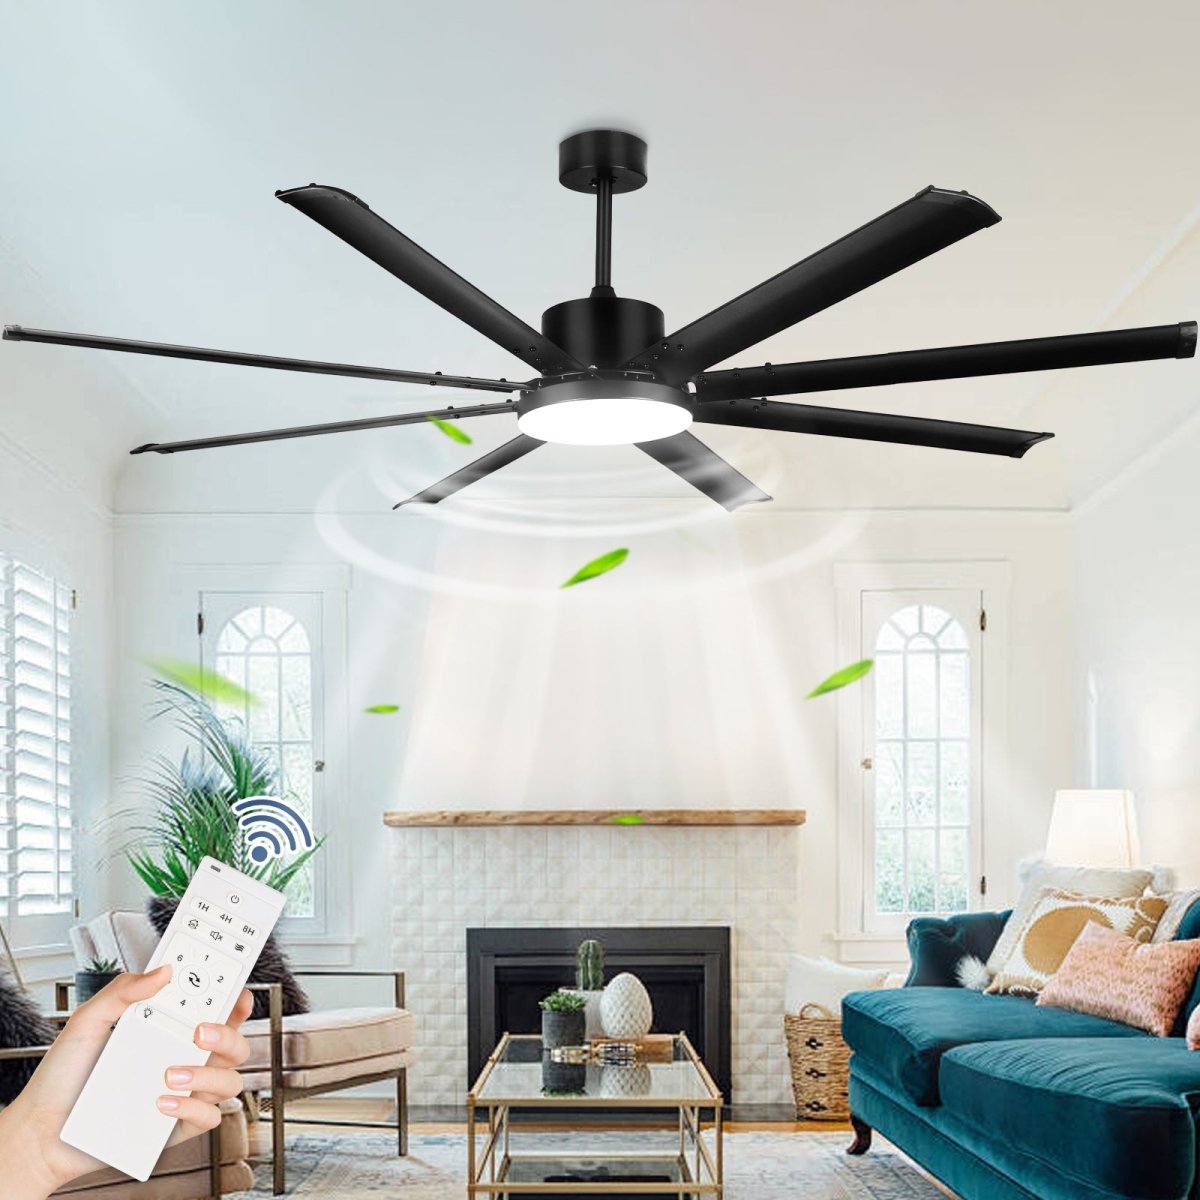 Depuley 80" Ceiling Fan With Lights and Remote, Large Black Ceiling Fans Quiet Reversible DC Motor 8 Aluminum Blades, Modern Ceiling Fan for Kitchen Living Room Patio, 6 Speed 3 CCT 3000K-6000K, Timer - WS-FPZ58-24C-8-B 1 | DEPULEY